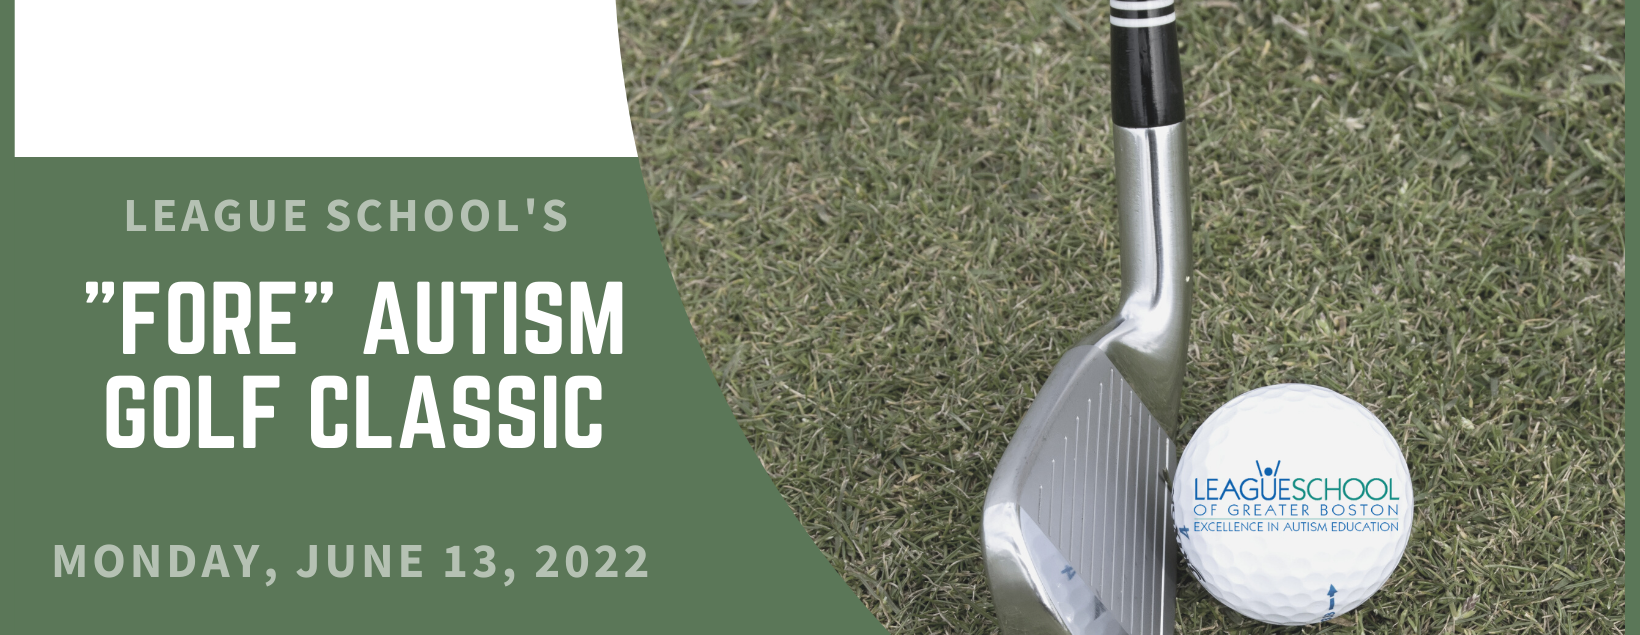 2022 "FORE" Autism Golf Classic